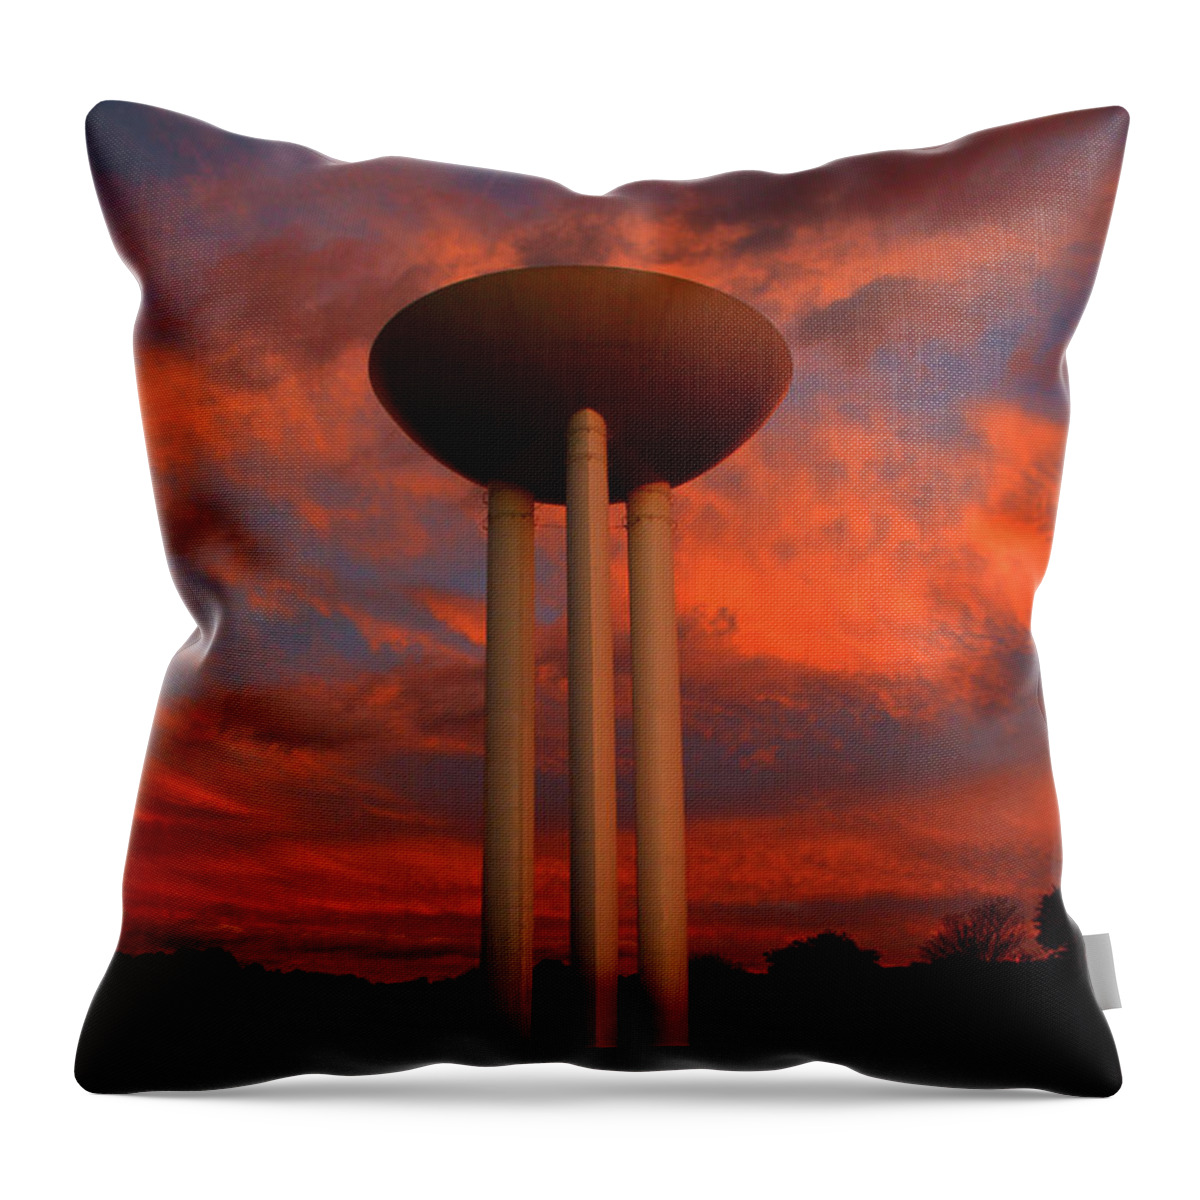 Bell Works Throw Pillow featuring the photograph Bell Works Transistor Water Tower by Raymond Salani III